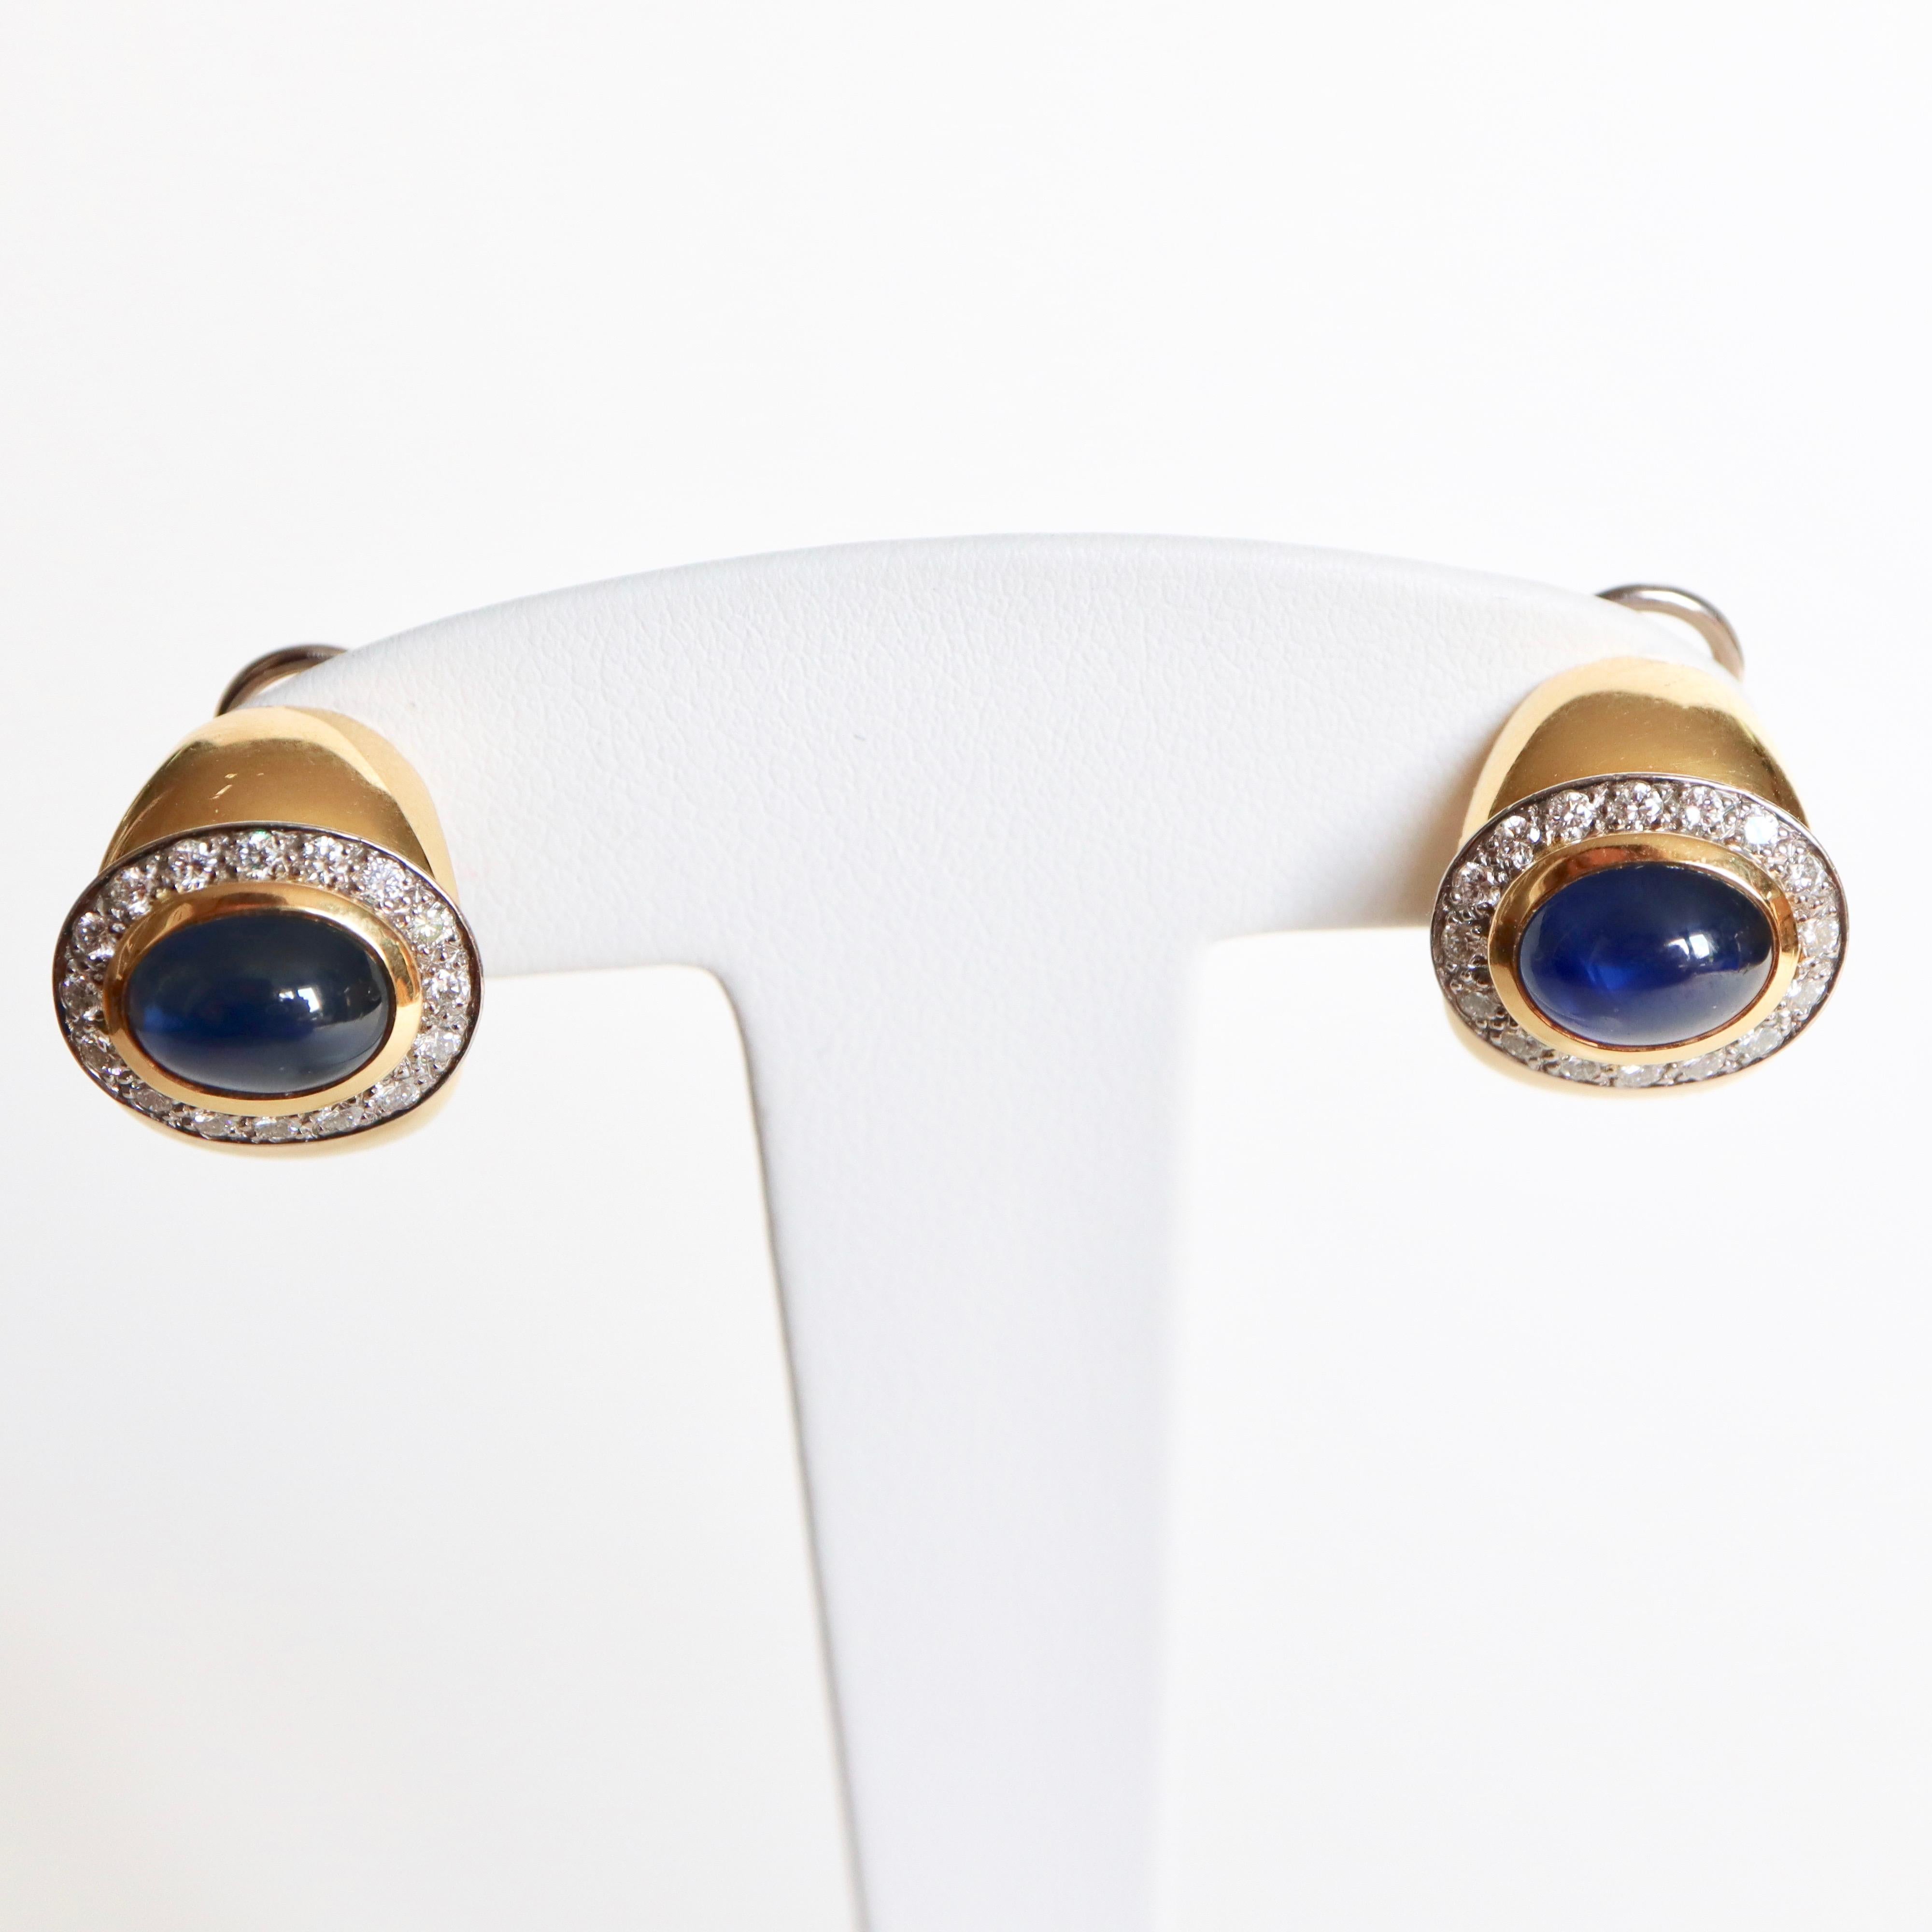 Women's Wempe 18 Karat Yellow Gold and White Gold Earrings Set with Cabochon Sapphires